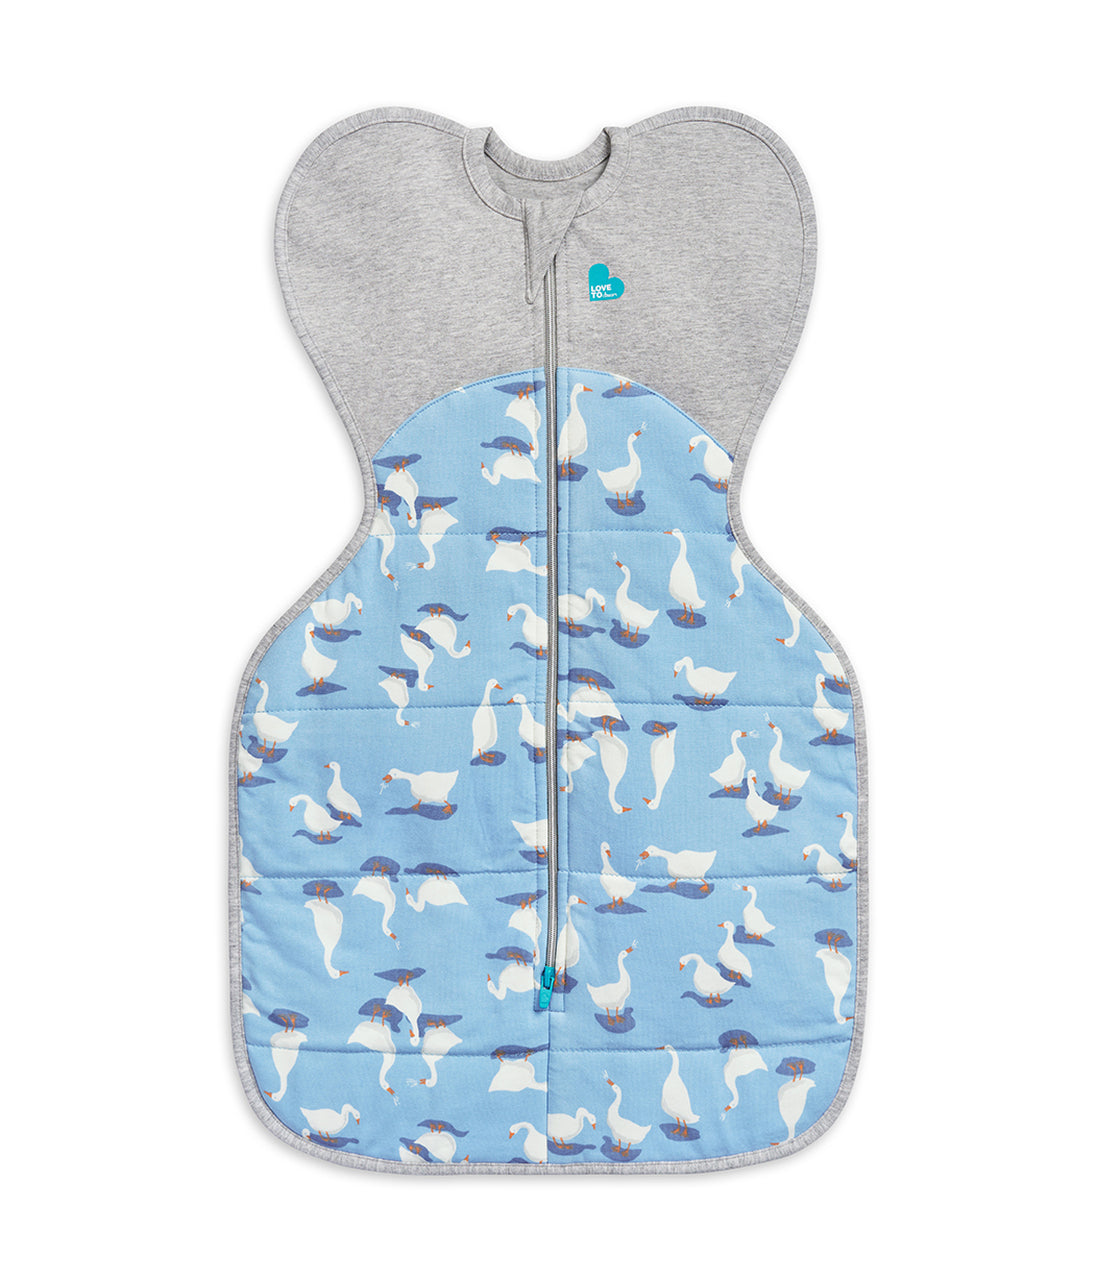 Love To Dream Swaddle Up Warm 2.5 Tog - Silly Goose Blue